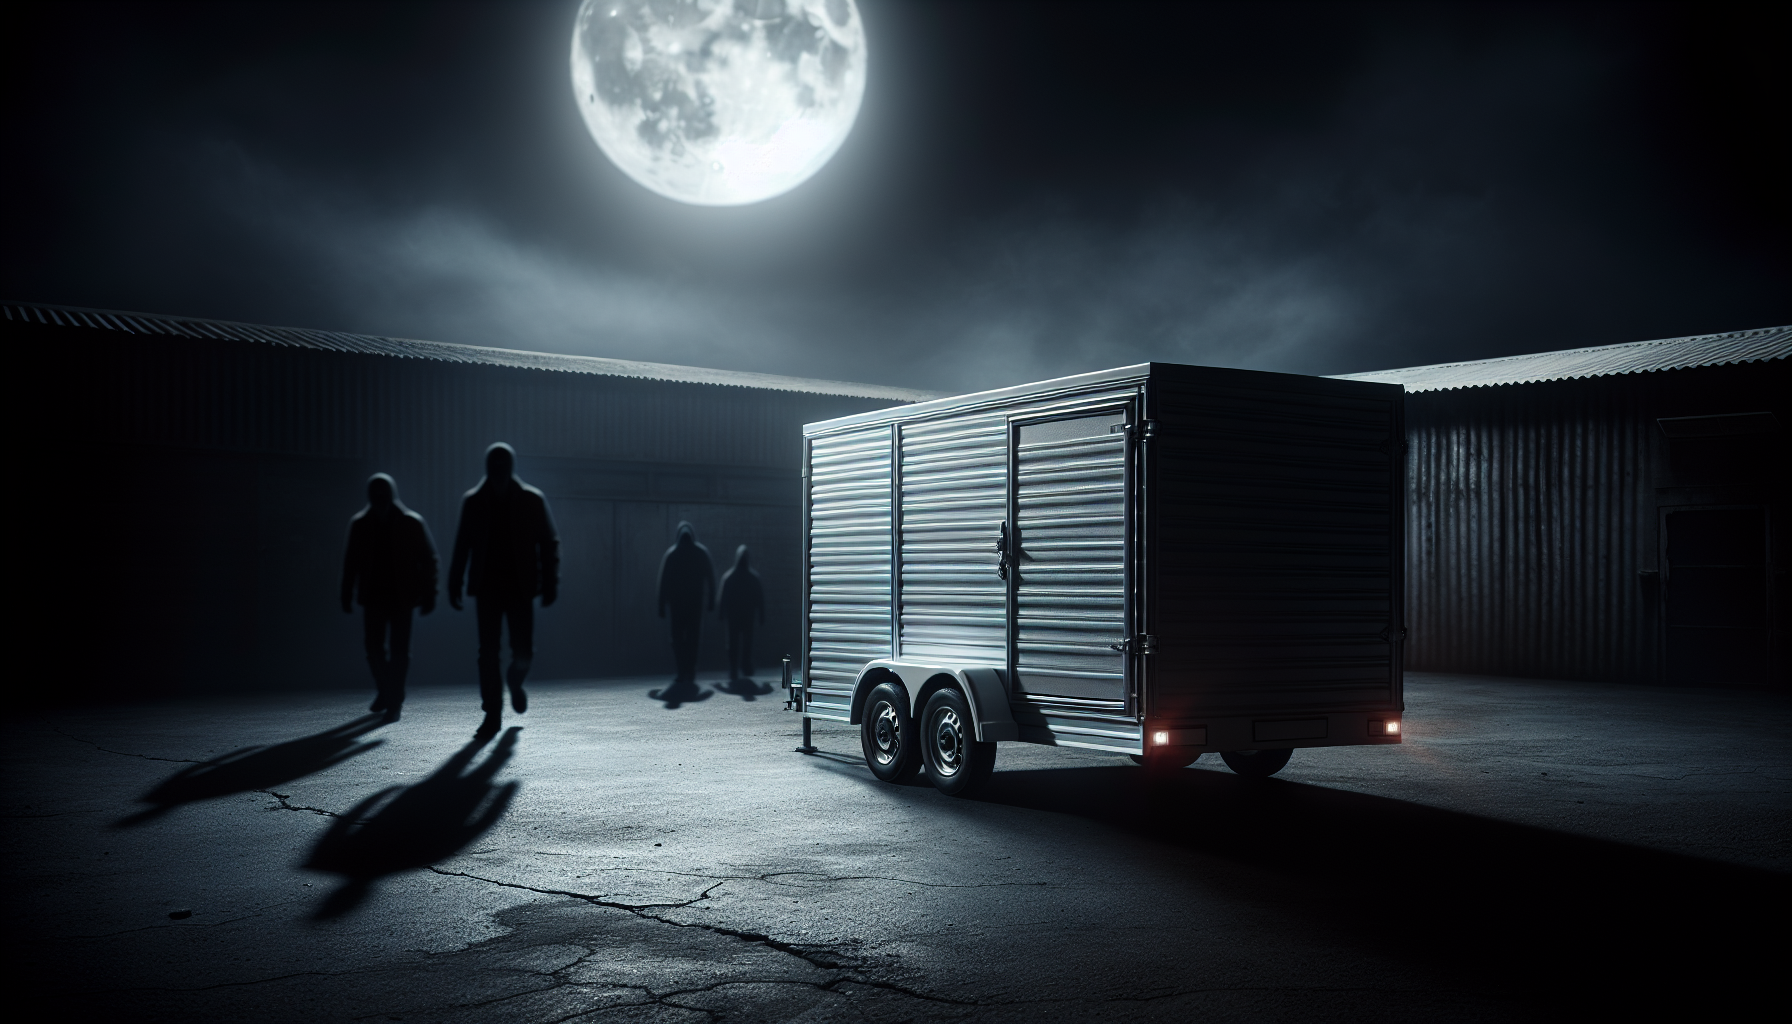 Illustration of a trailer being targeted by thieves